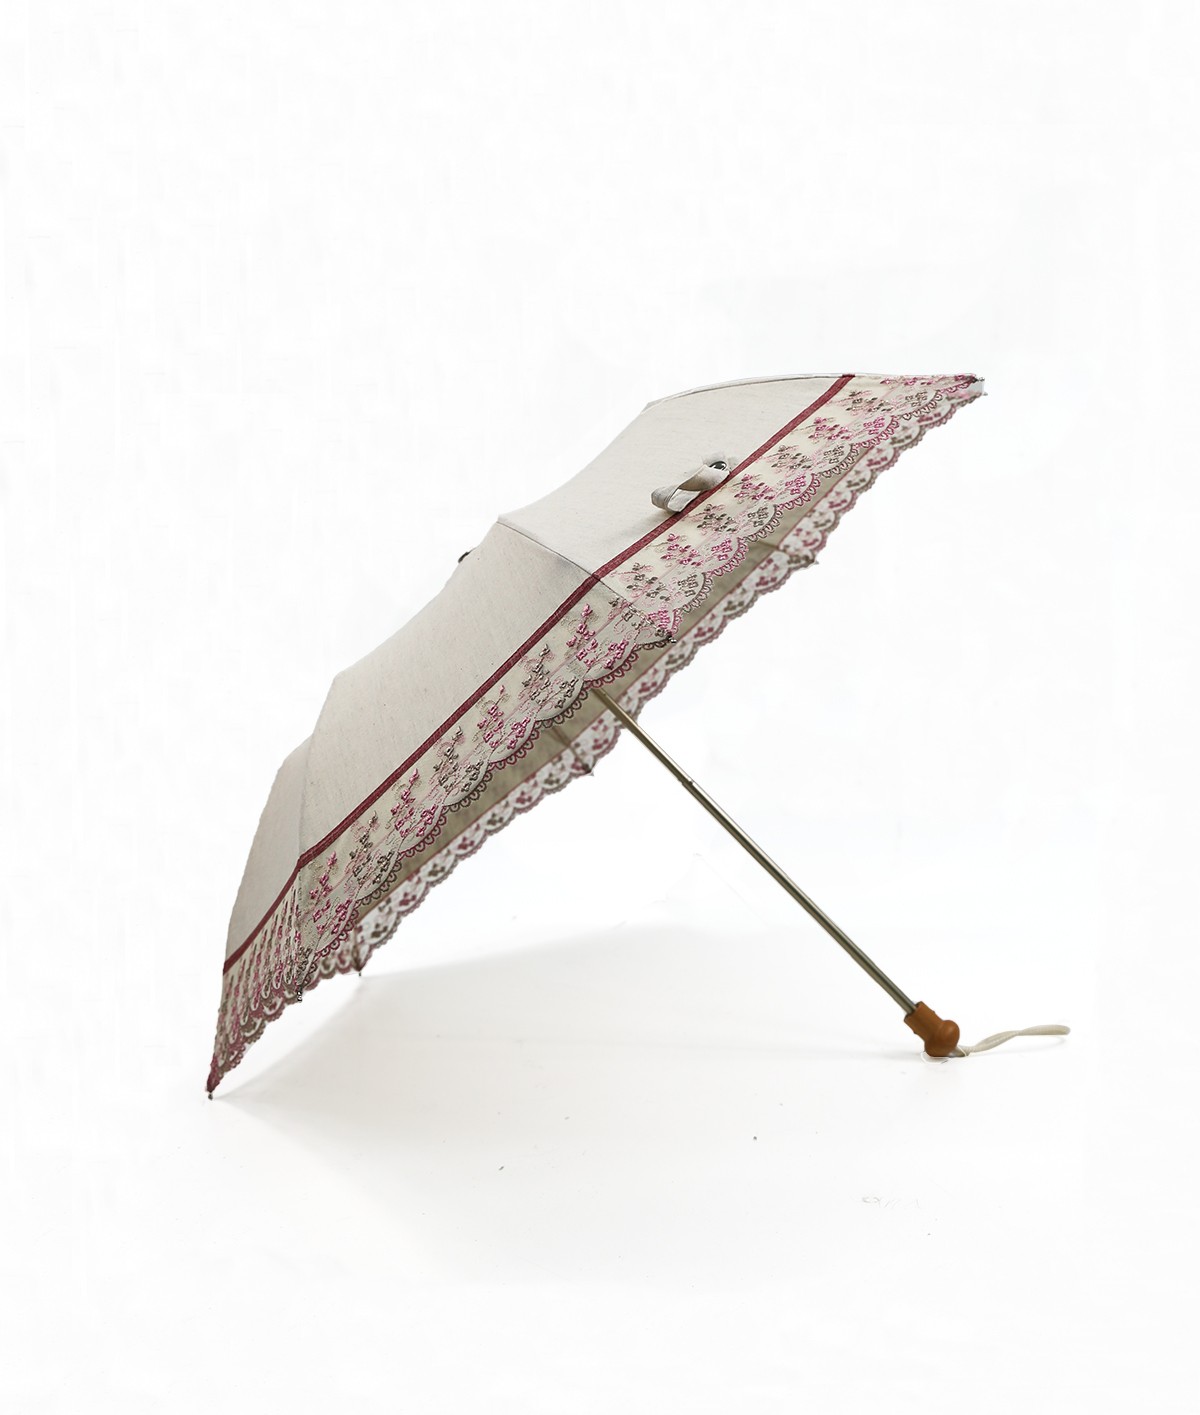 → Parasol "Small Flower" - Folding Sun Umbrellas Handcrafted in France by the Umbrellas Manufacturer Maison Pierre Vaux